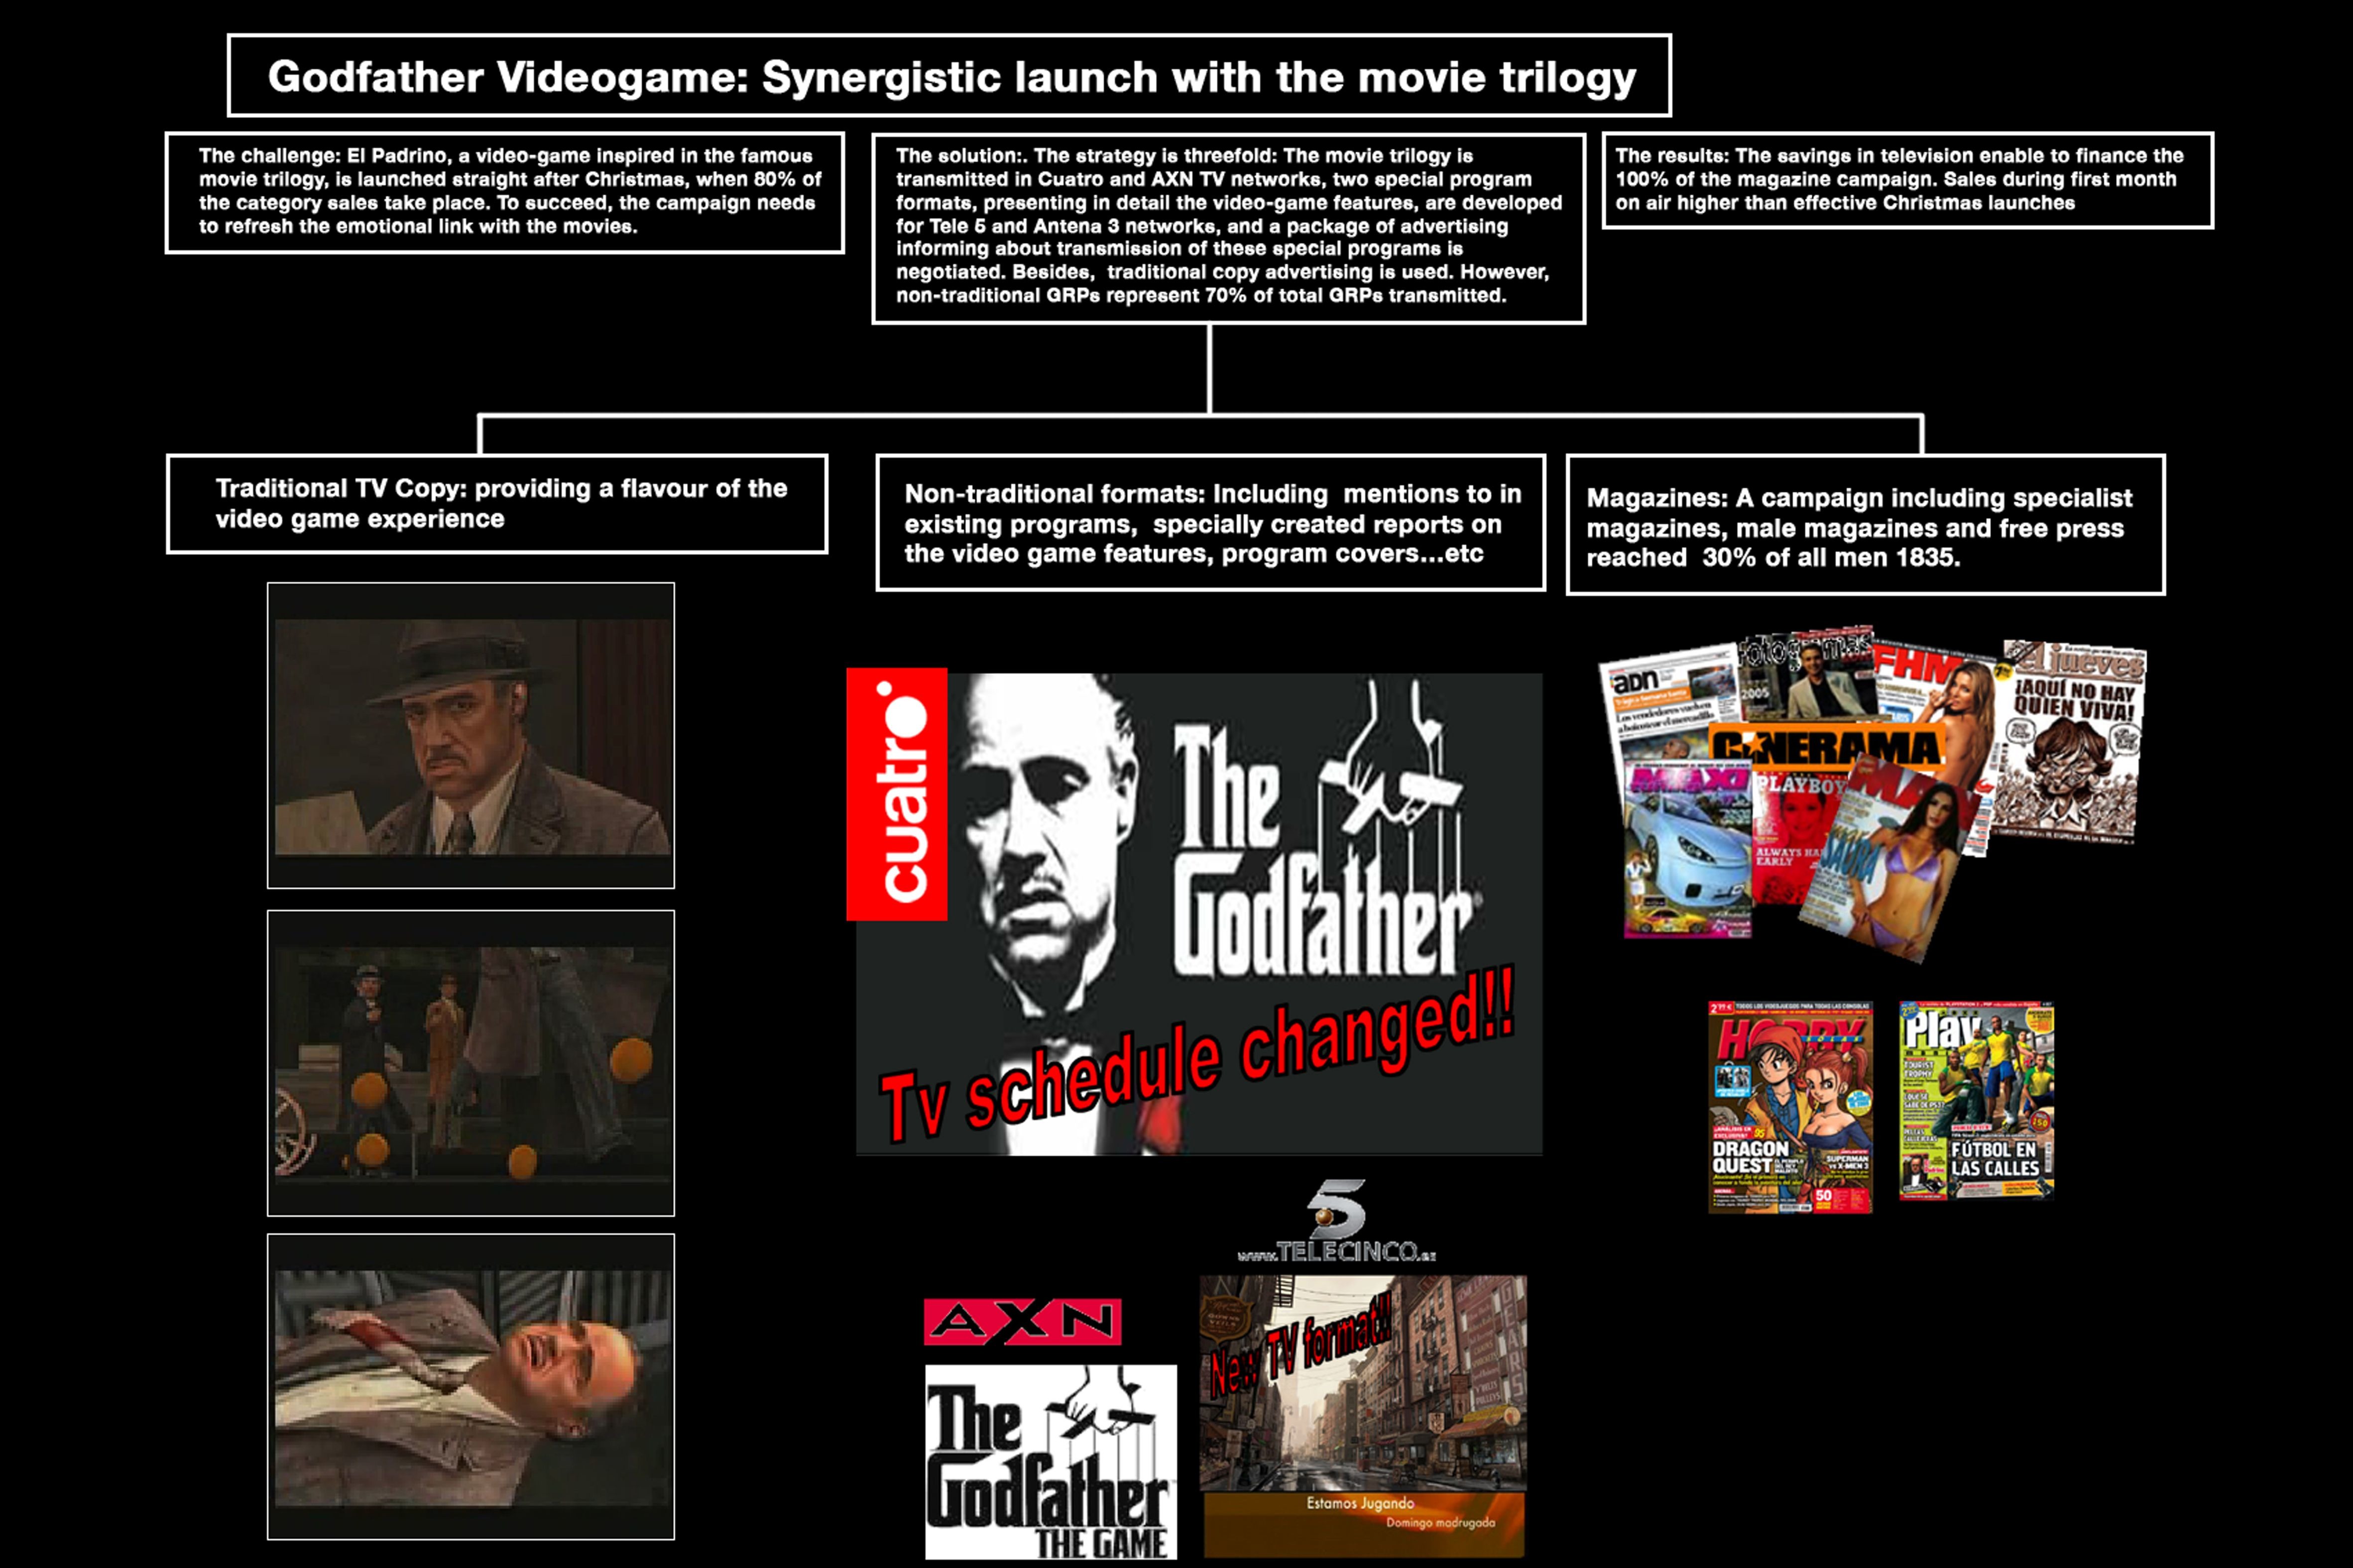 THE GODFATHER VIDEOGAME